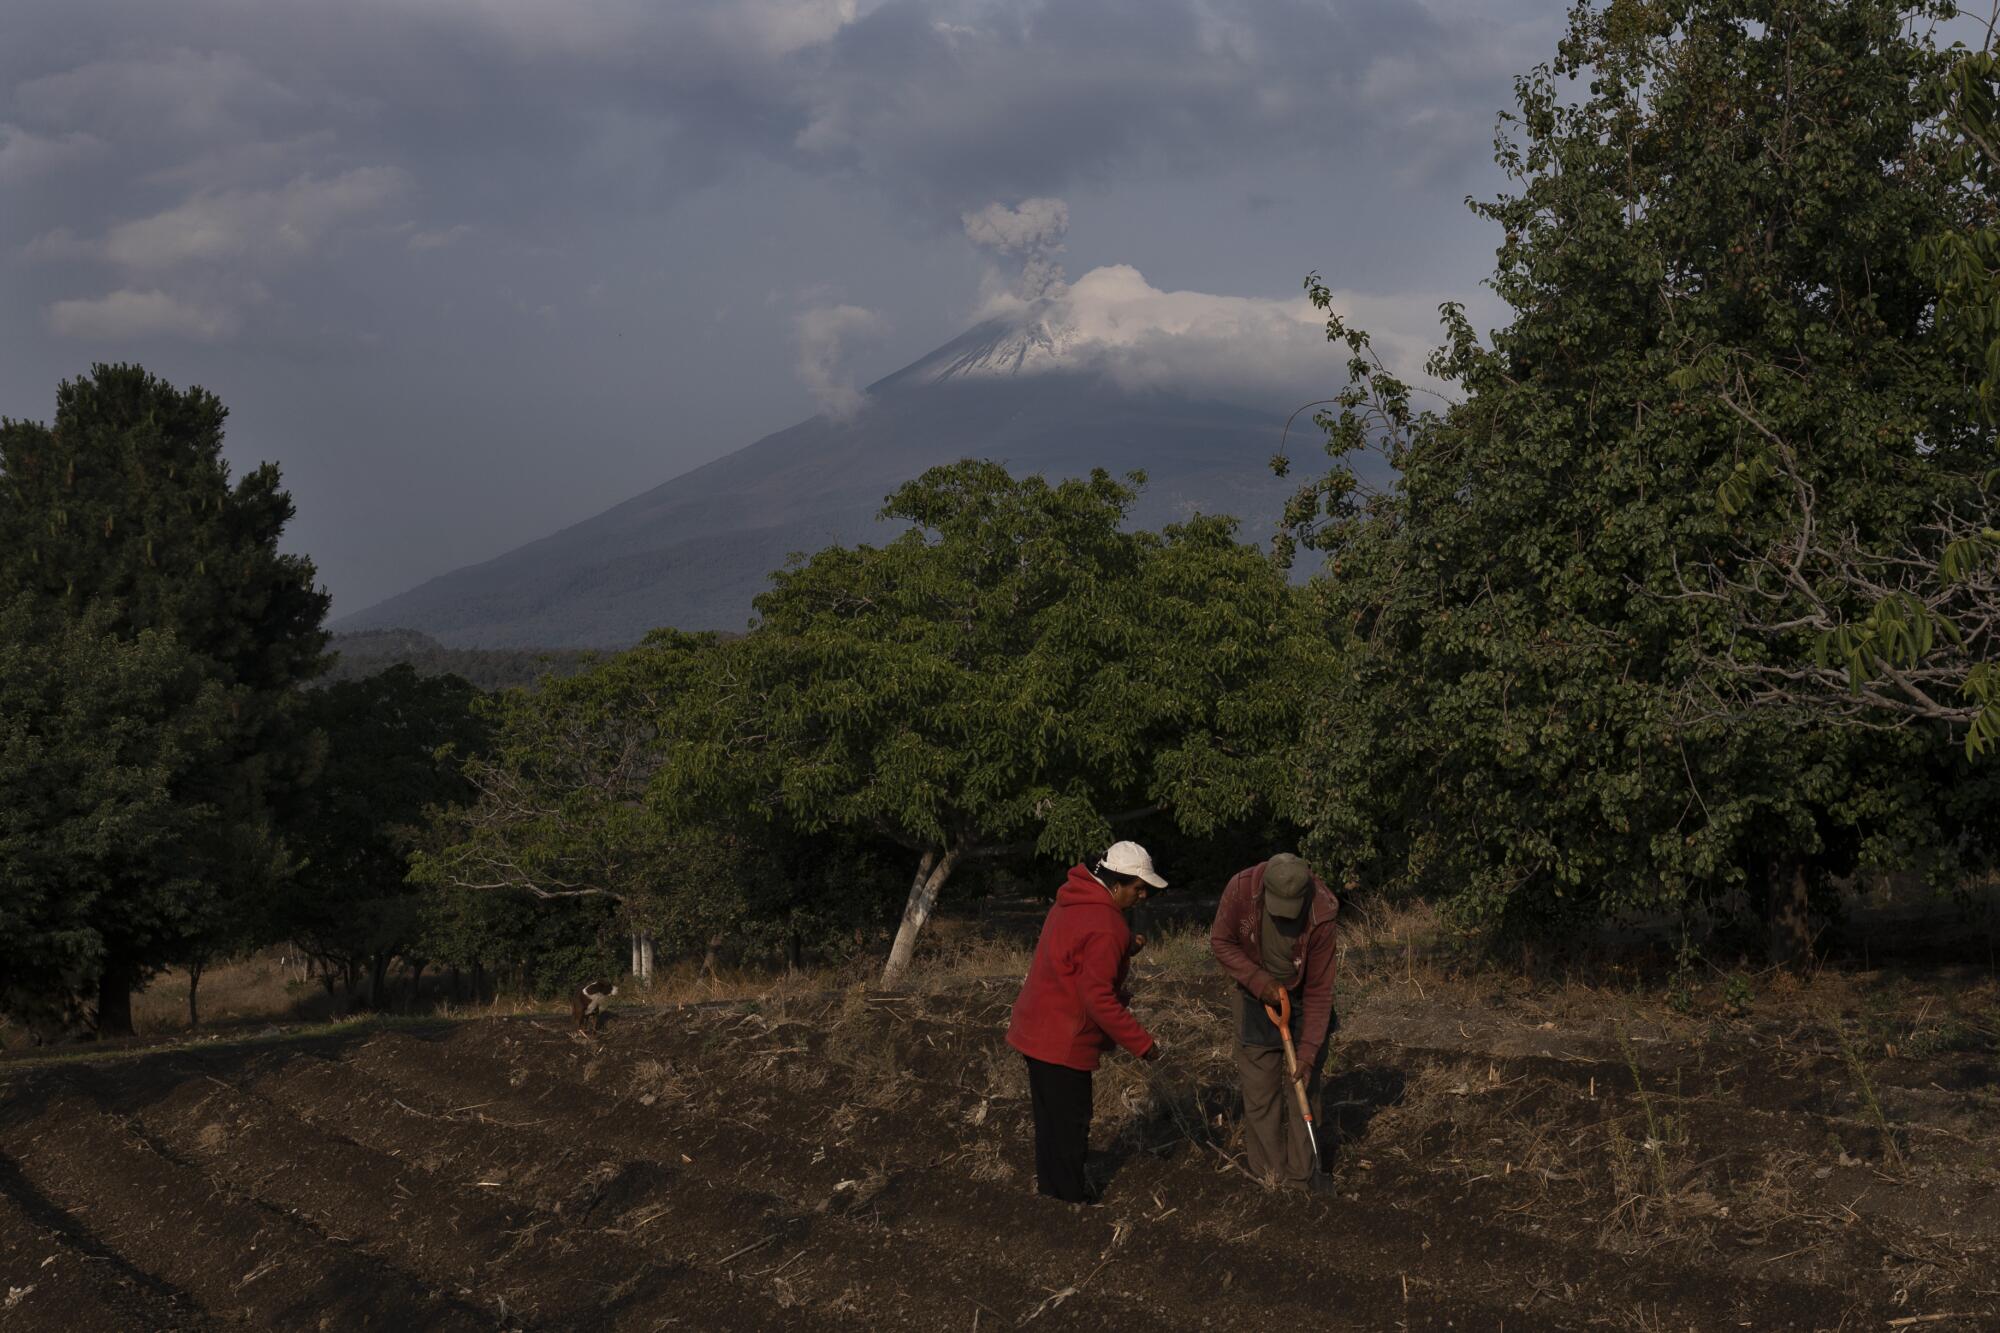 Two people plant corn on tilled ground near trees at the foot of a mountain emitting ash